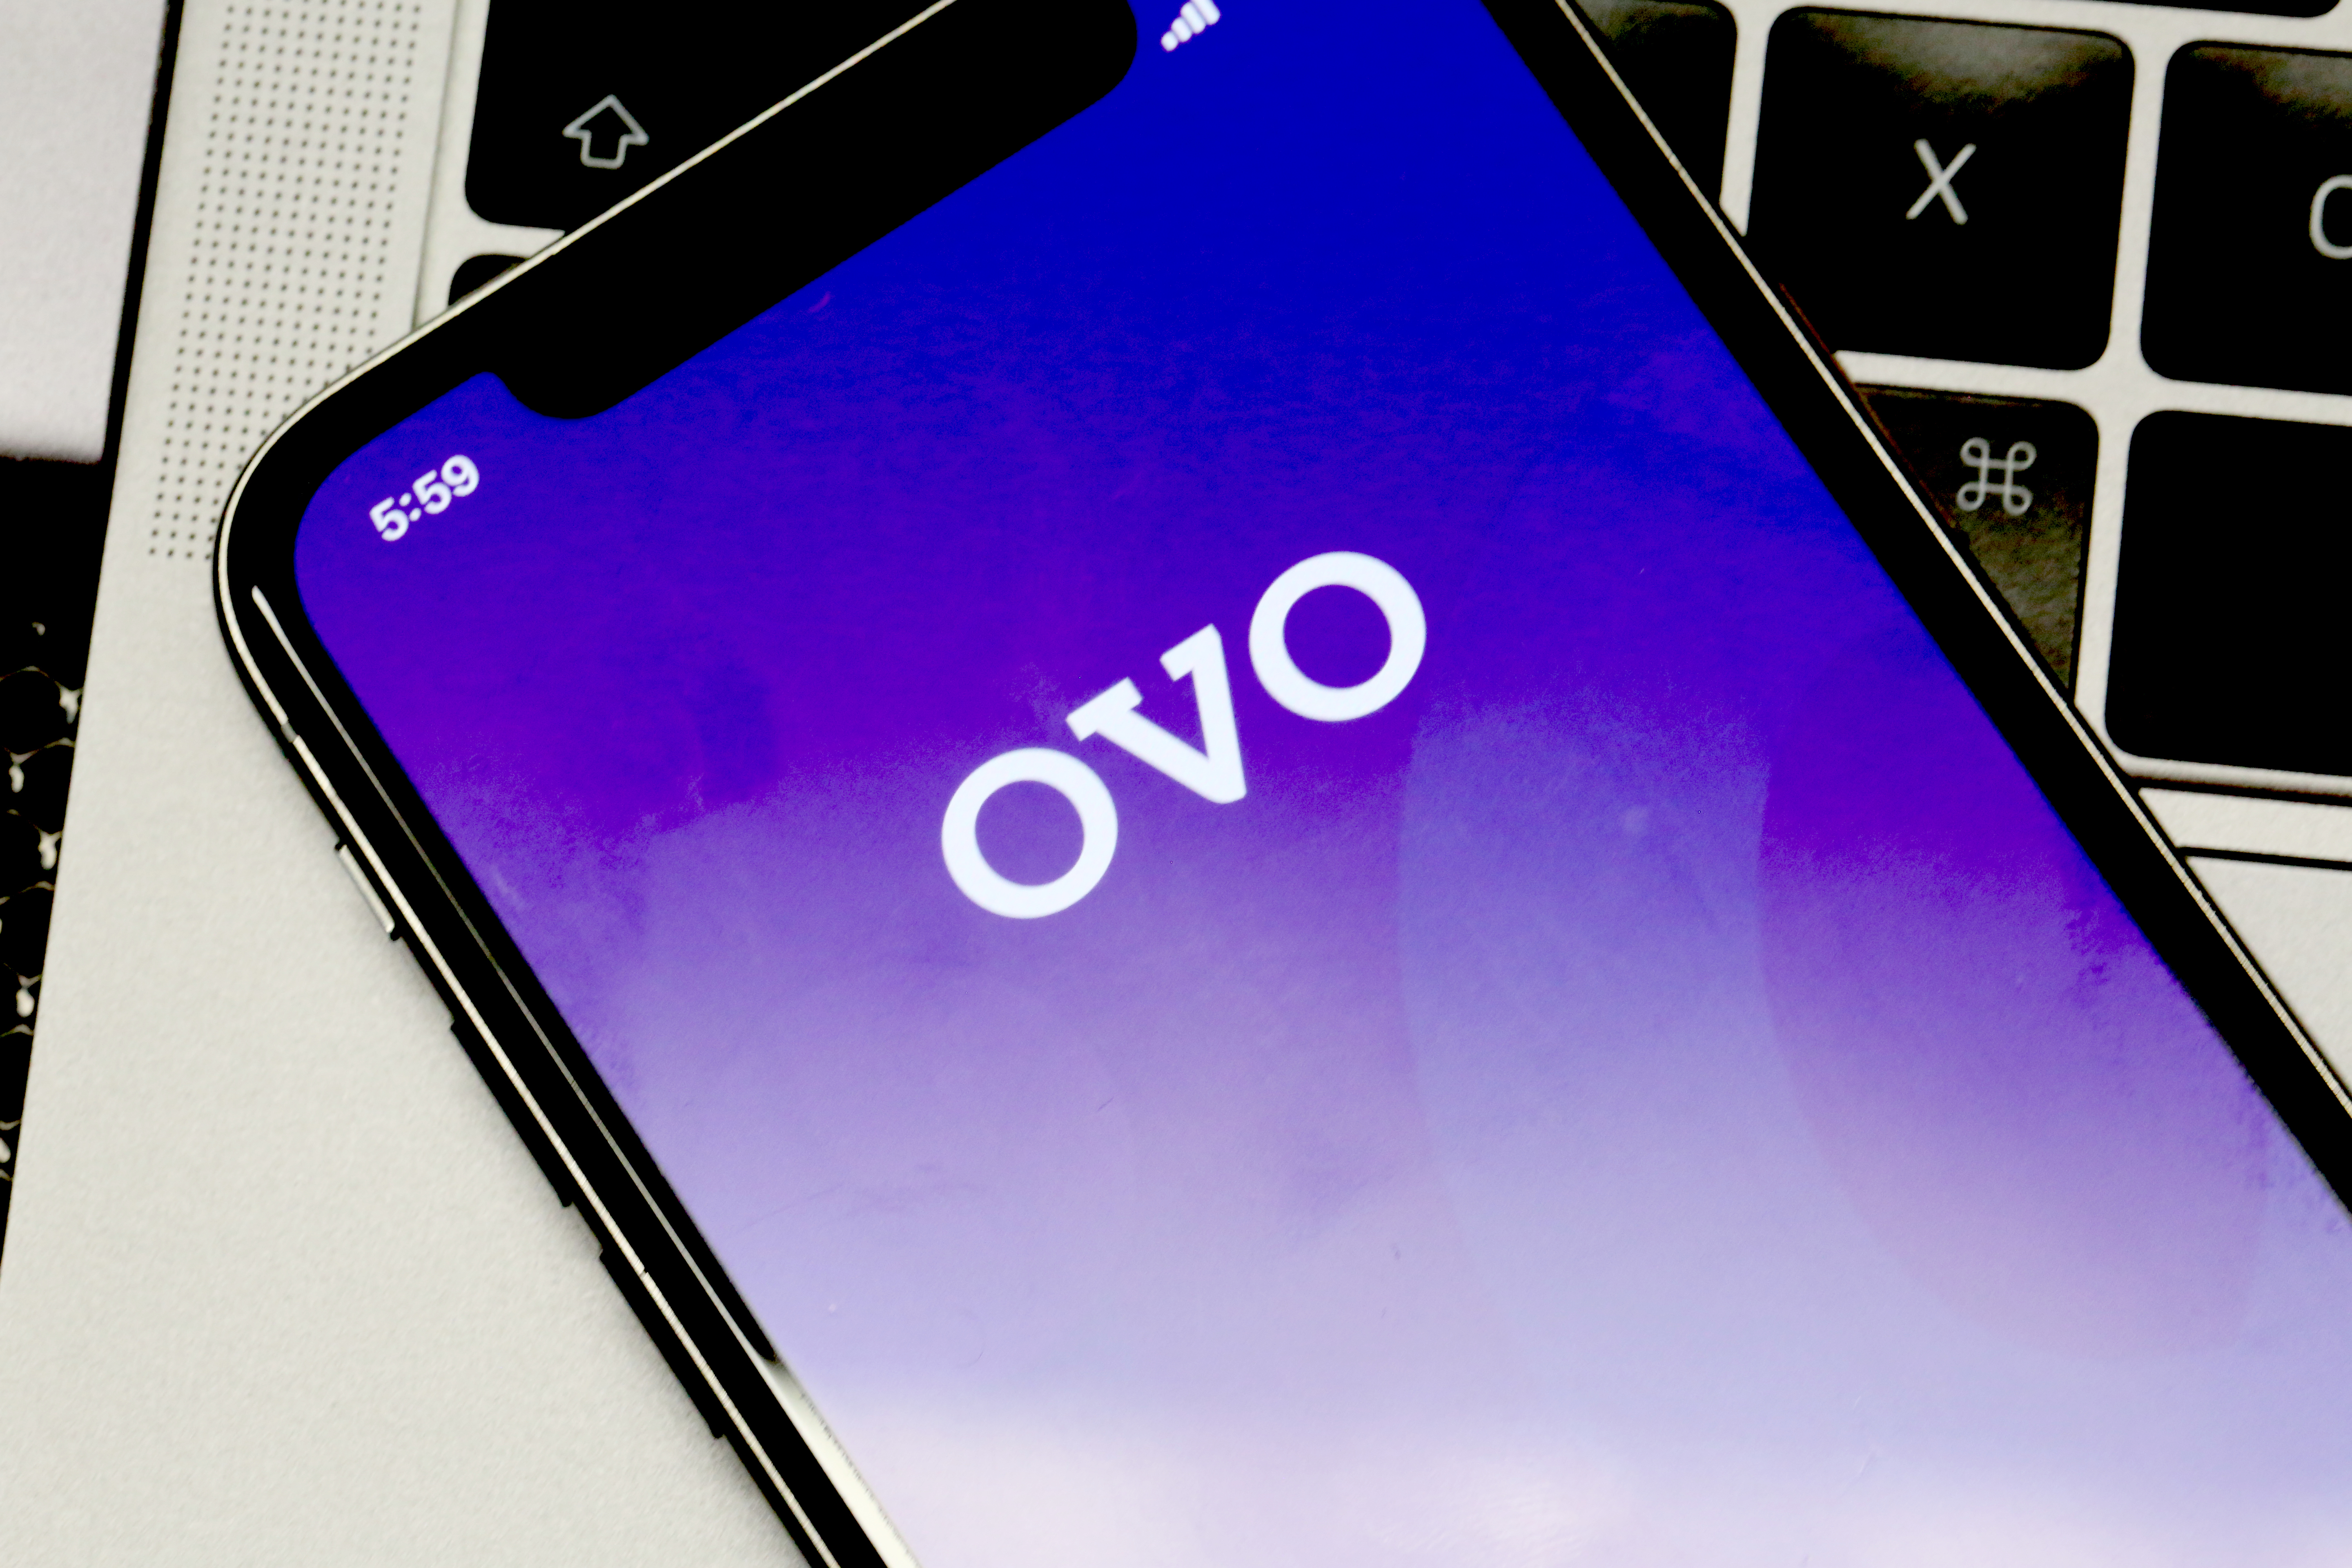 Digital wallet Ovo is officially Indonesia’s fifth unicorn